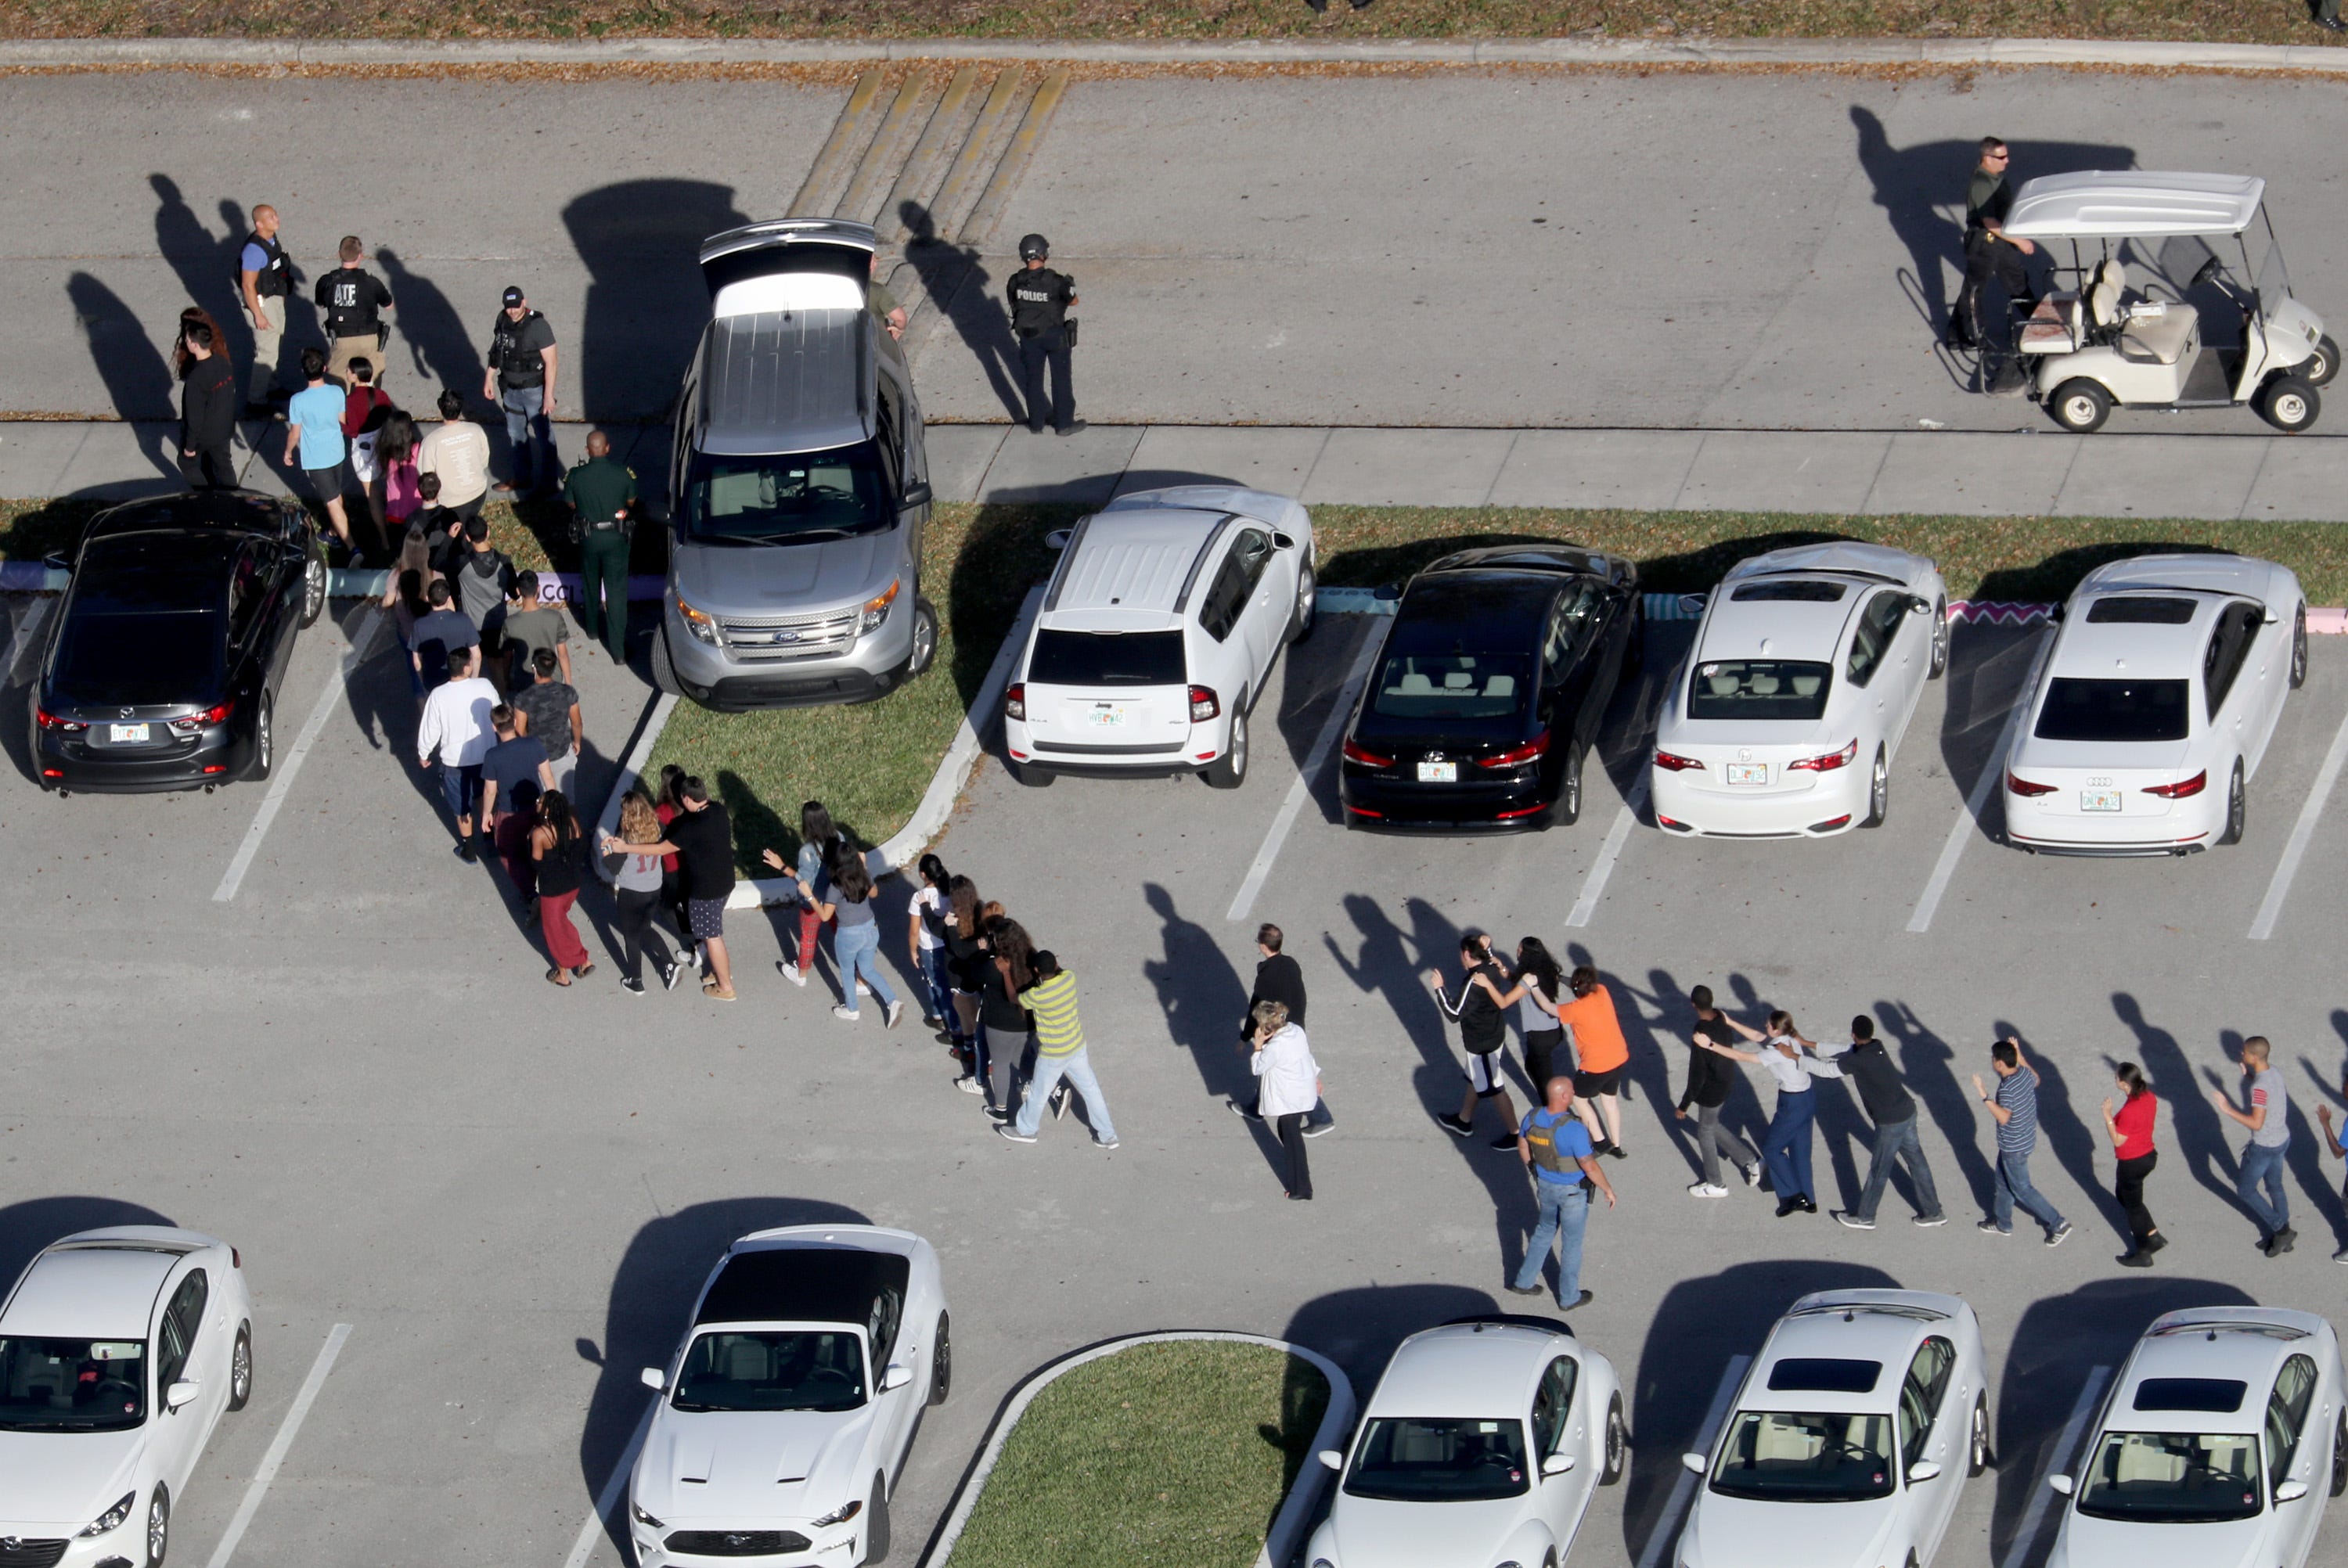 Students are evacuated by police out of Stoneman Douglas High School in Parkland, Florida, after a shooting on Wednesday, February 14, 2018. (Mike Stocker/Sun Sentinel/TNS)